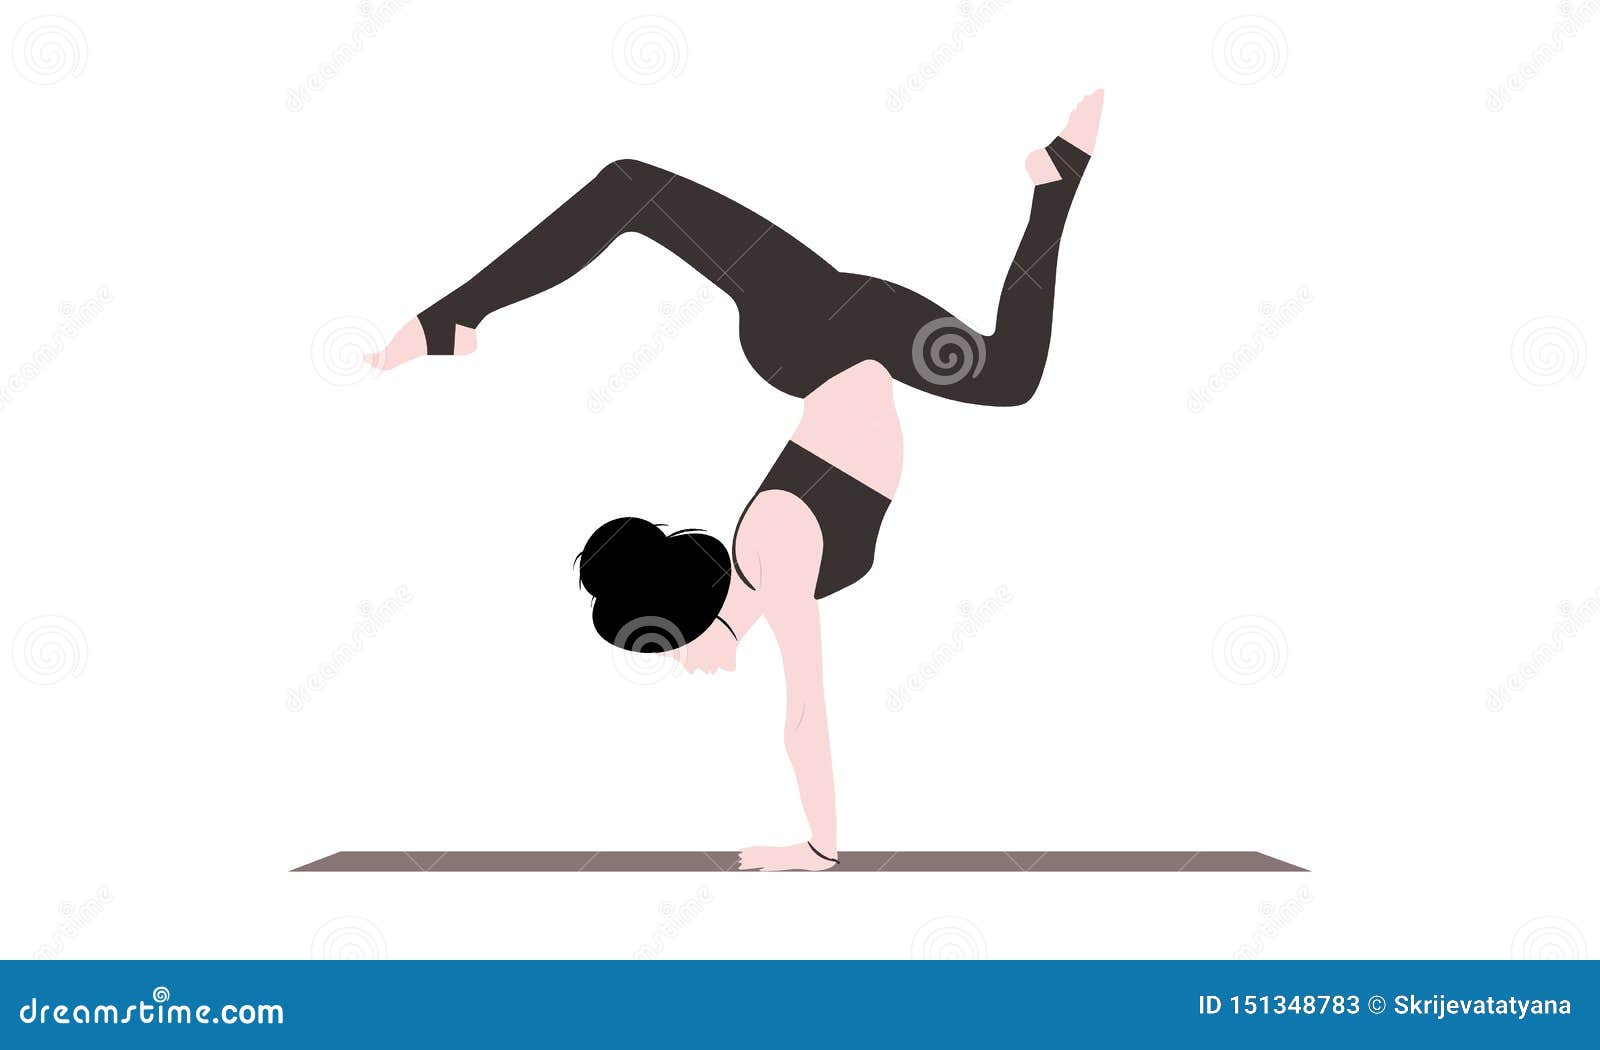 Pure Yoga Official Page - 【Tips from Pure Yoga Teacher Cora】 🌺 Scorpion  Pose in Forearm Balance Preparation 🌺 Level: Intermediate/Advanced 💙  Using a yoga chair can help you work towards Scorpion